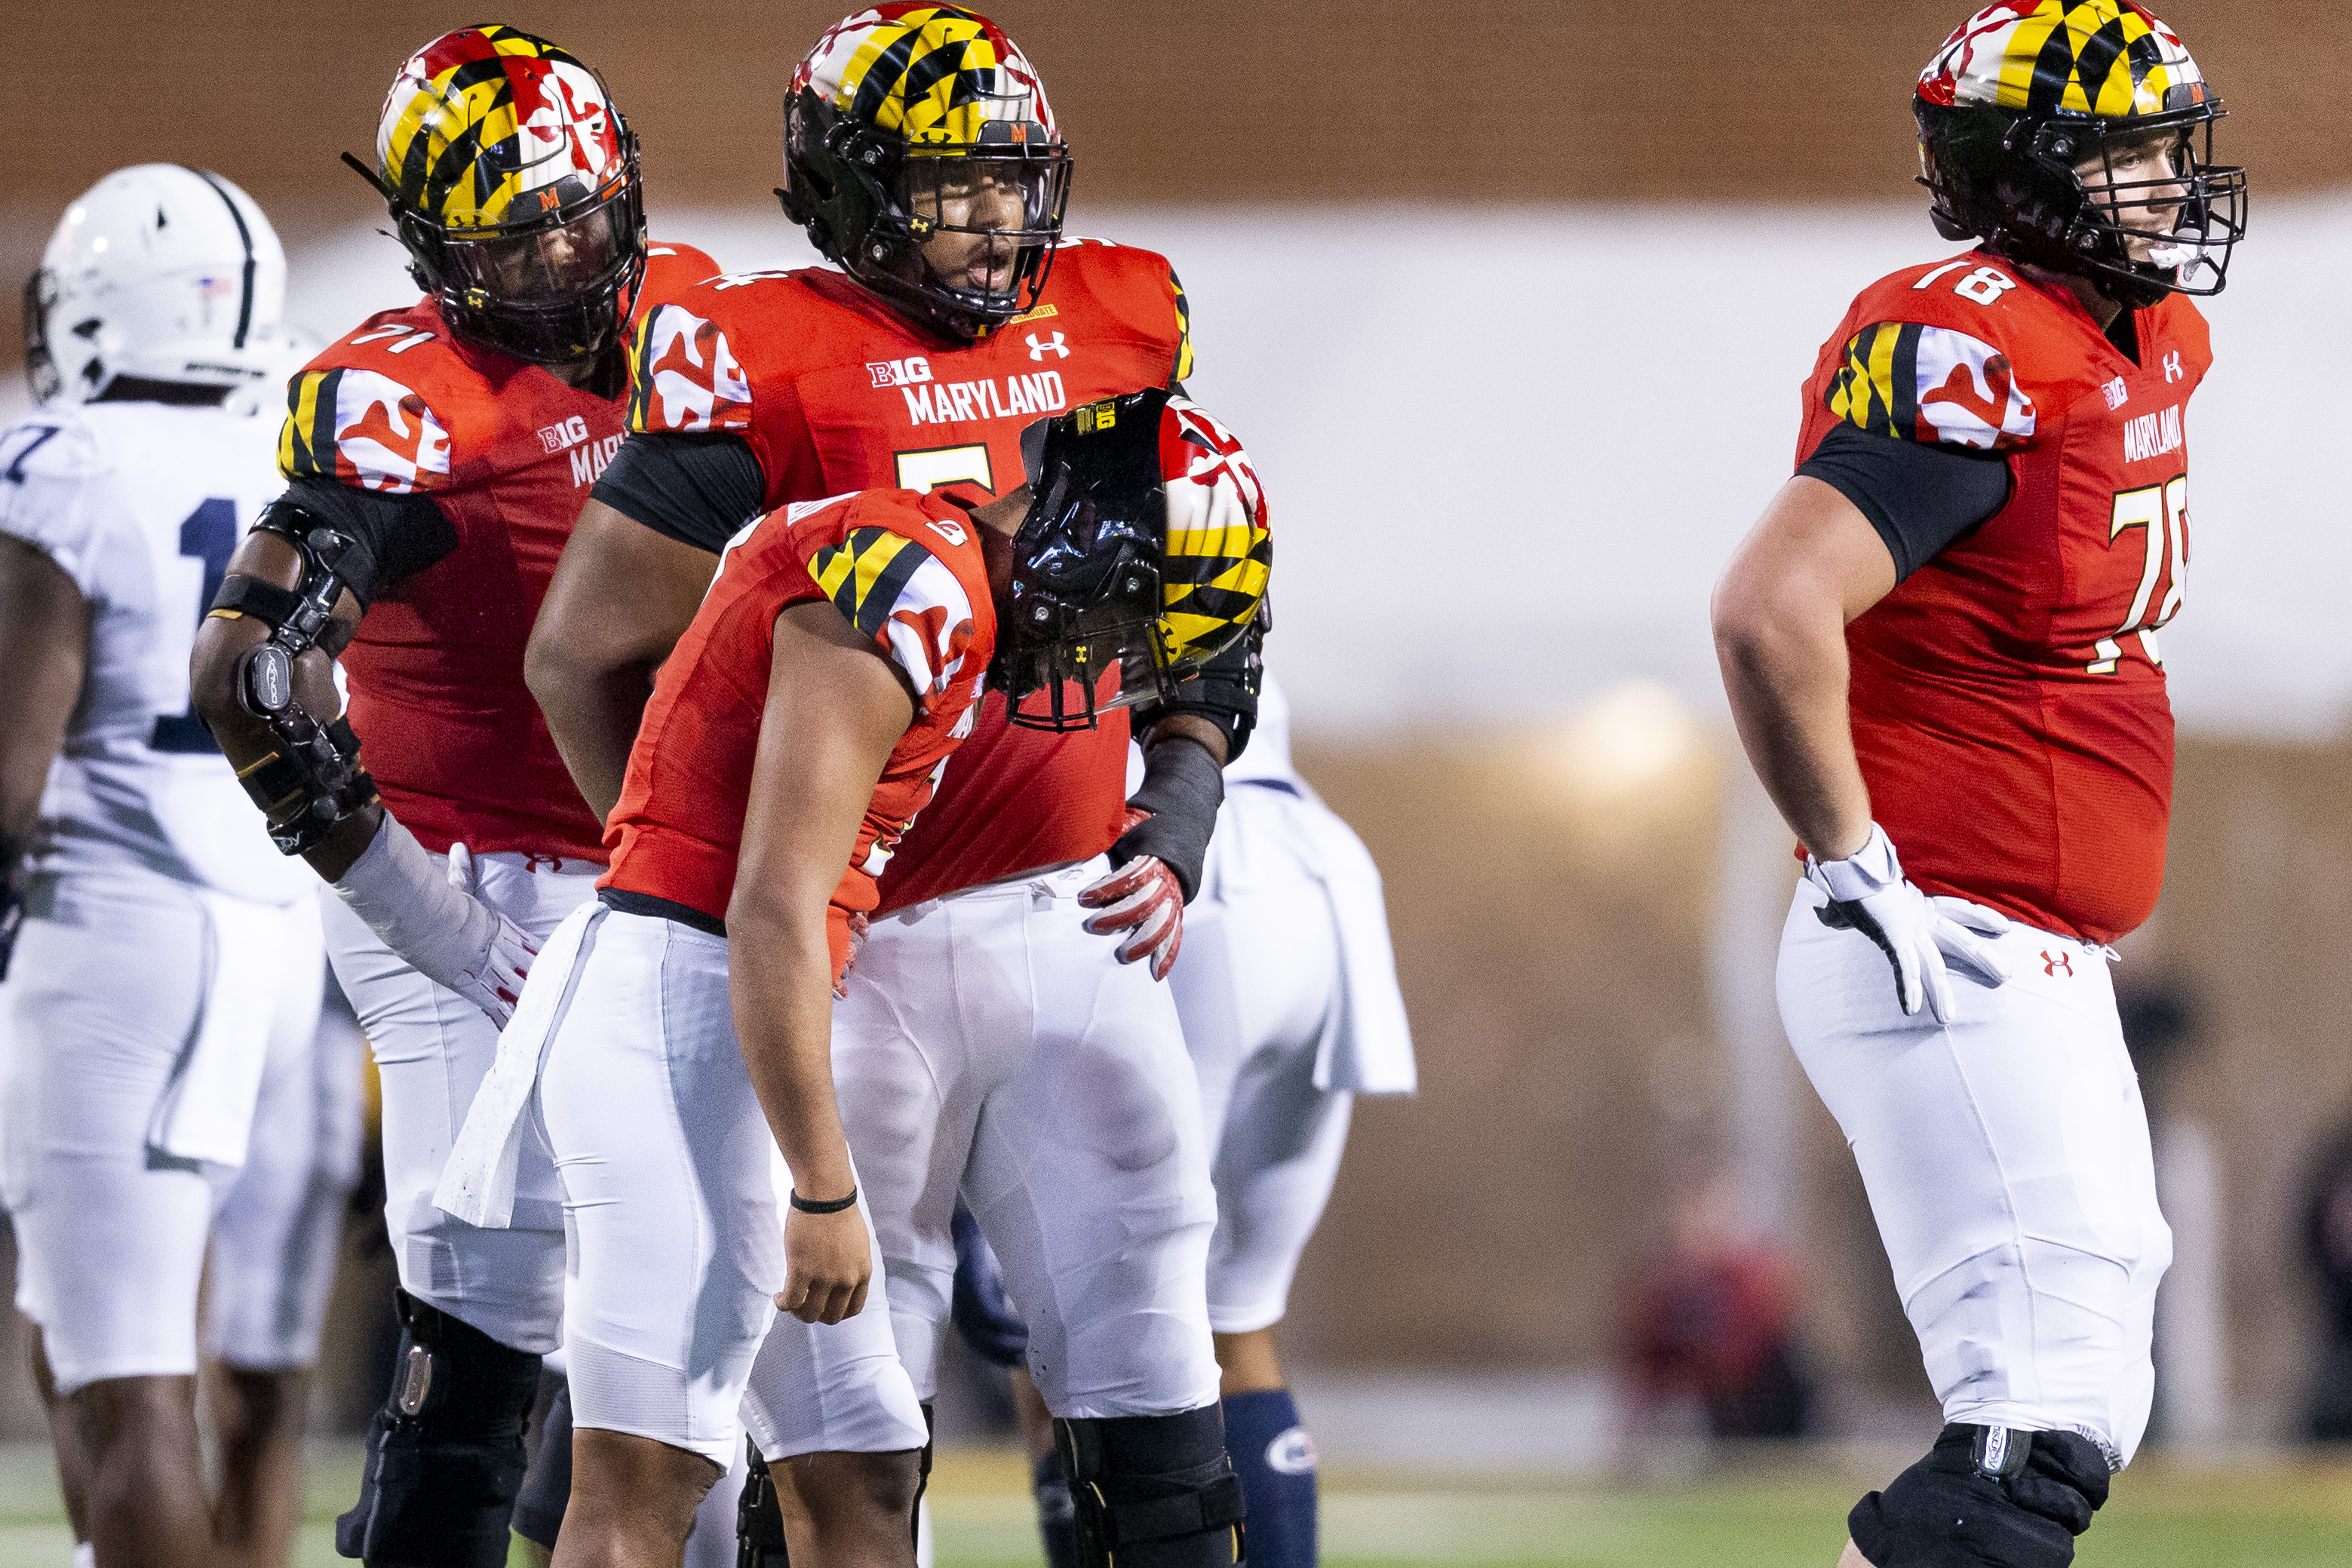 Maryland quarterback Taulia Tagovailoa is dejected after an incomplete pass during the fourth quarter on Nov. 6, 2021. Joe Hermitt | jhermitt@pennlive.com